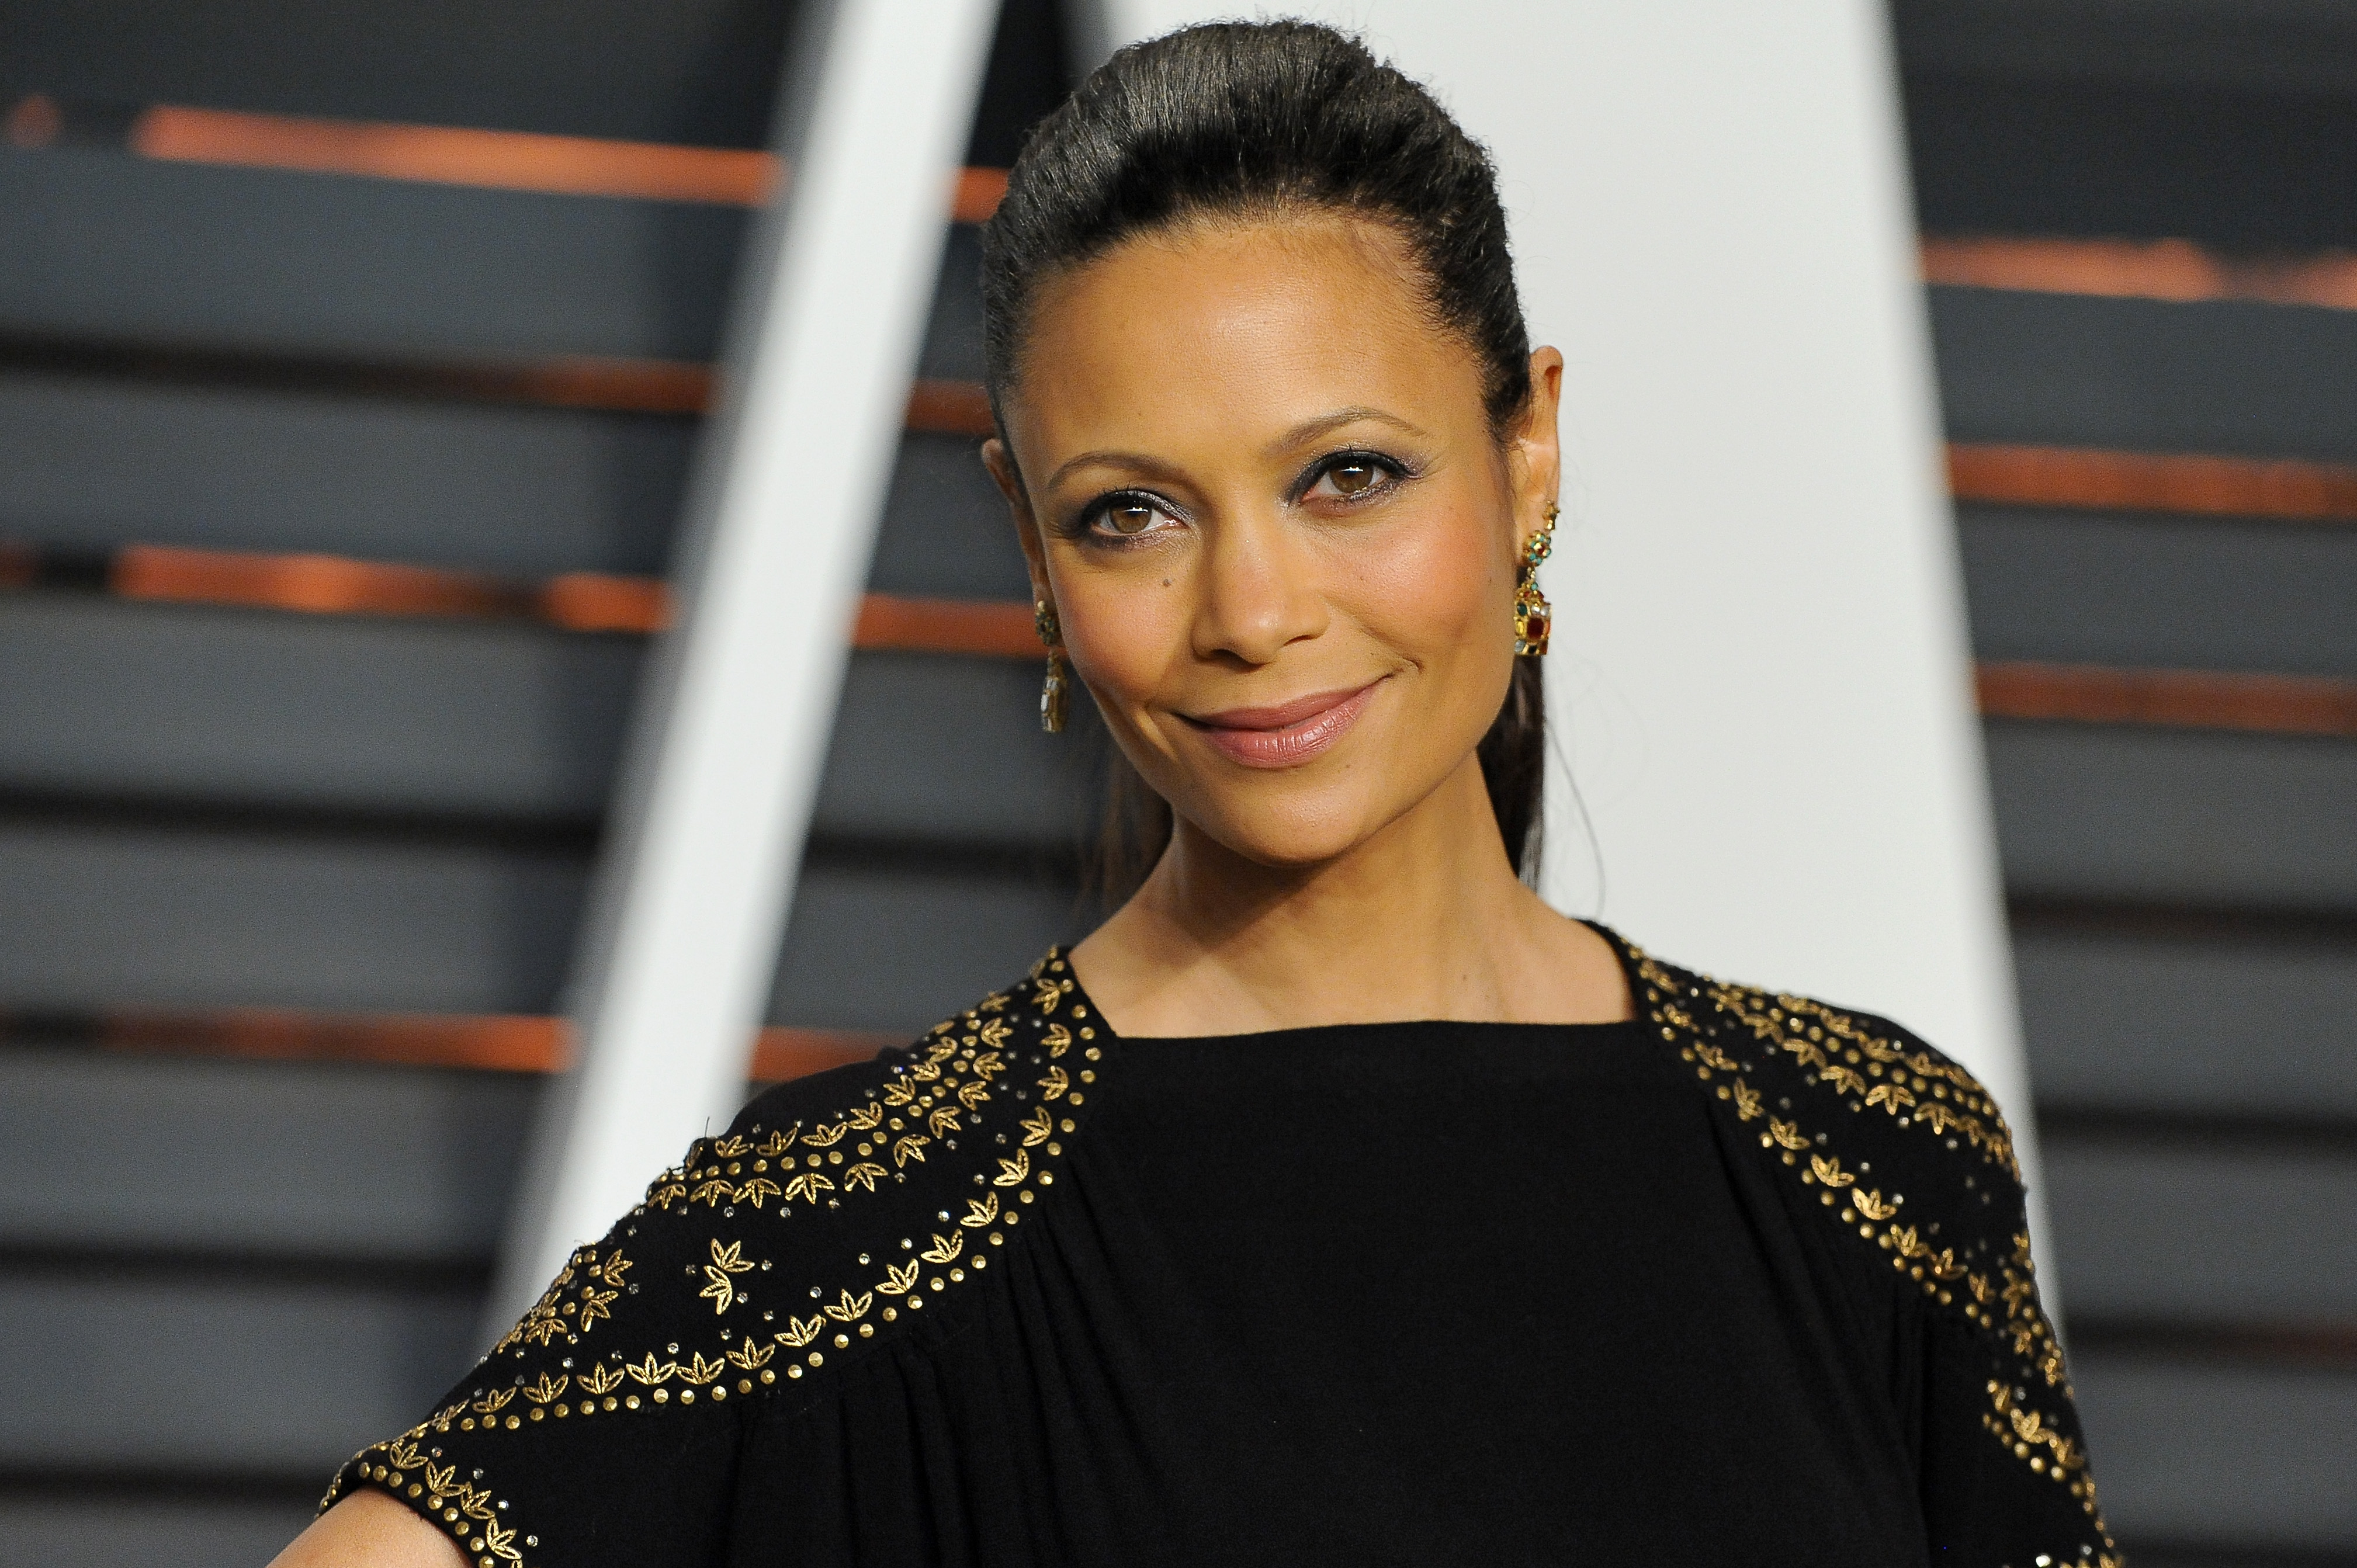 Actress Thandie Newton attends the 2015 Vanity Fair Oscar Party hosted by Graydon Carter at Wallis Annenberg Center for the Performing Arts on February 22, 2015 in Beverly Hills, California. (Jon Kopaloff—FilmMagic)